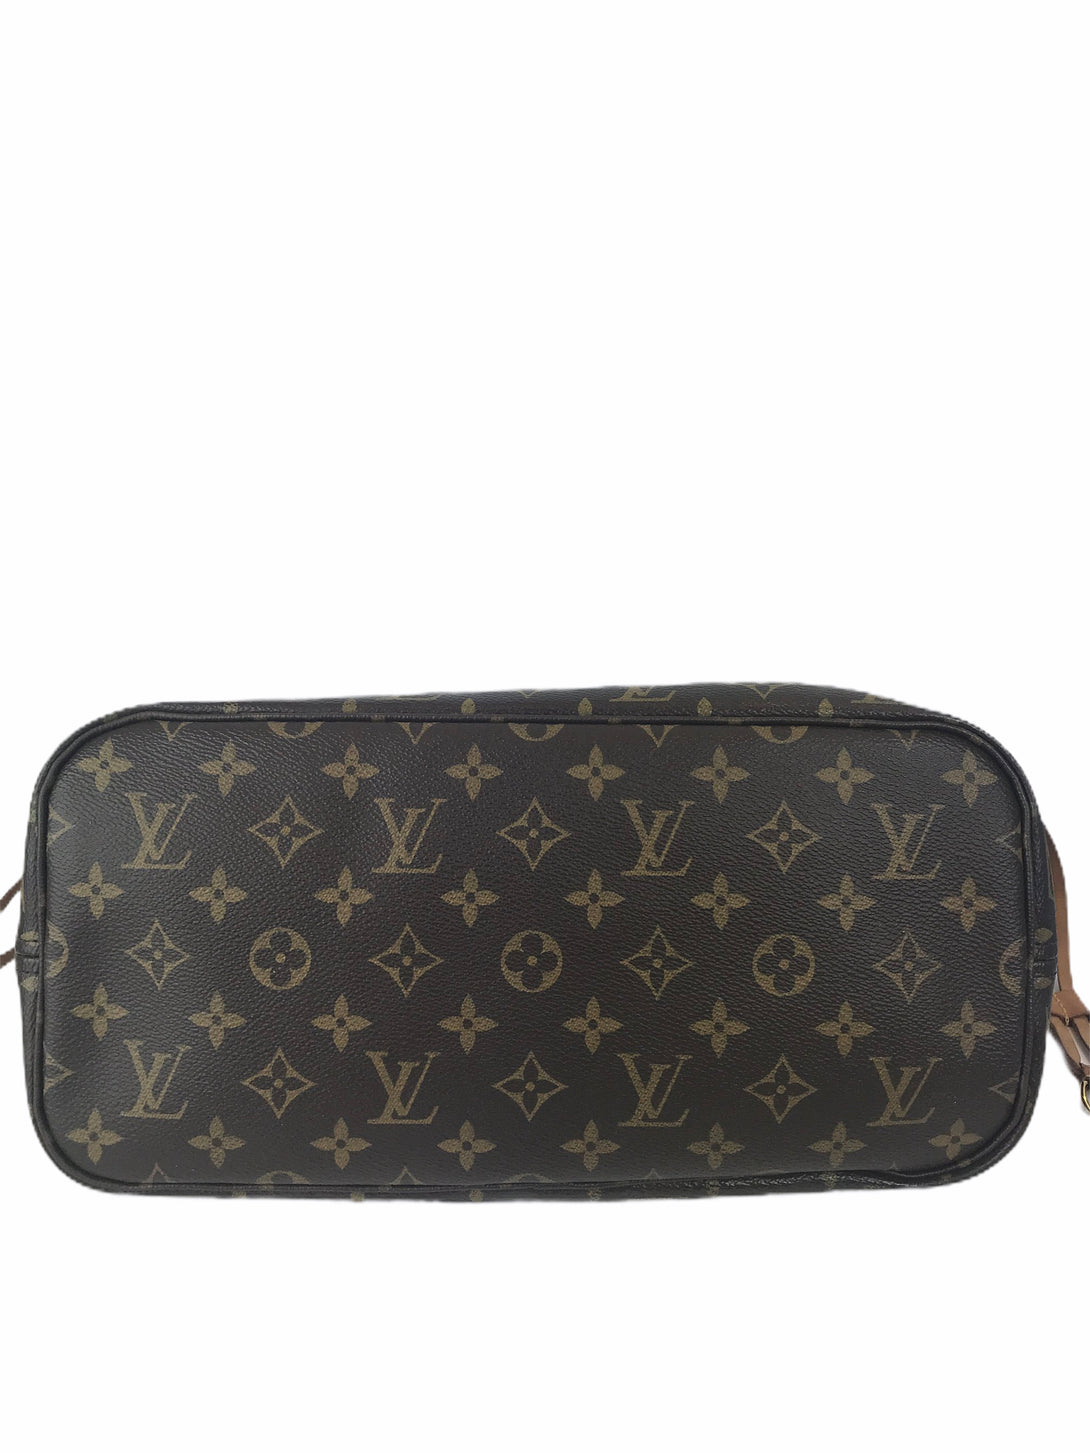 Louis Vuitton Monogram ‘Neverfull’ MM from the "V" Collection - Siopaella Designer Exchange